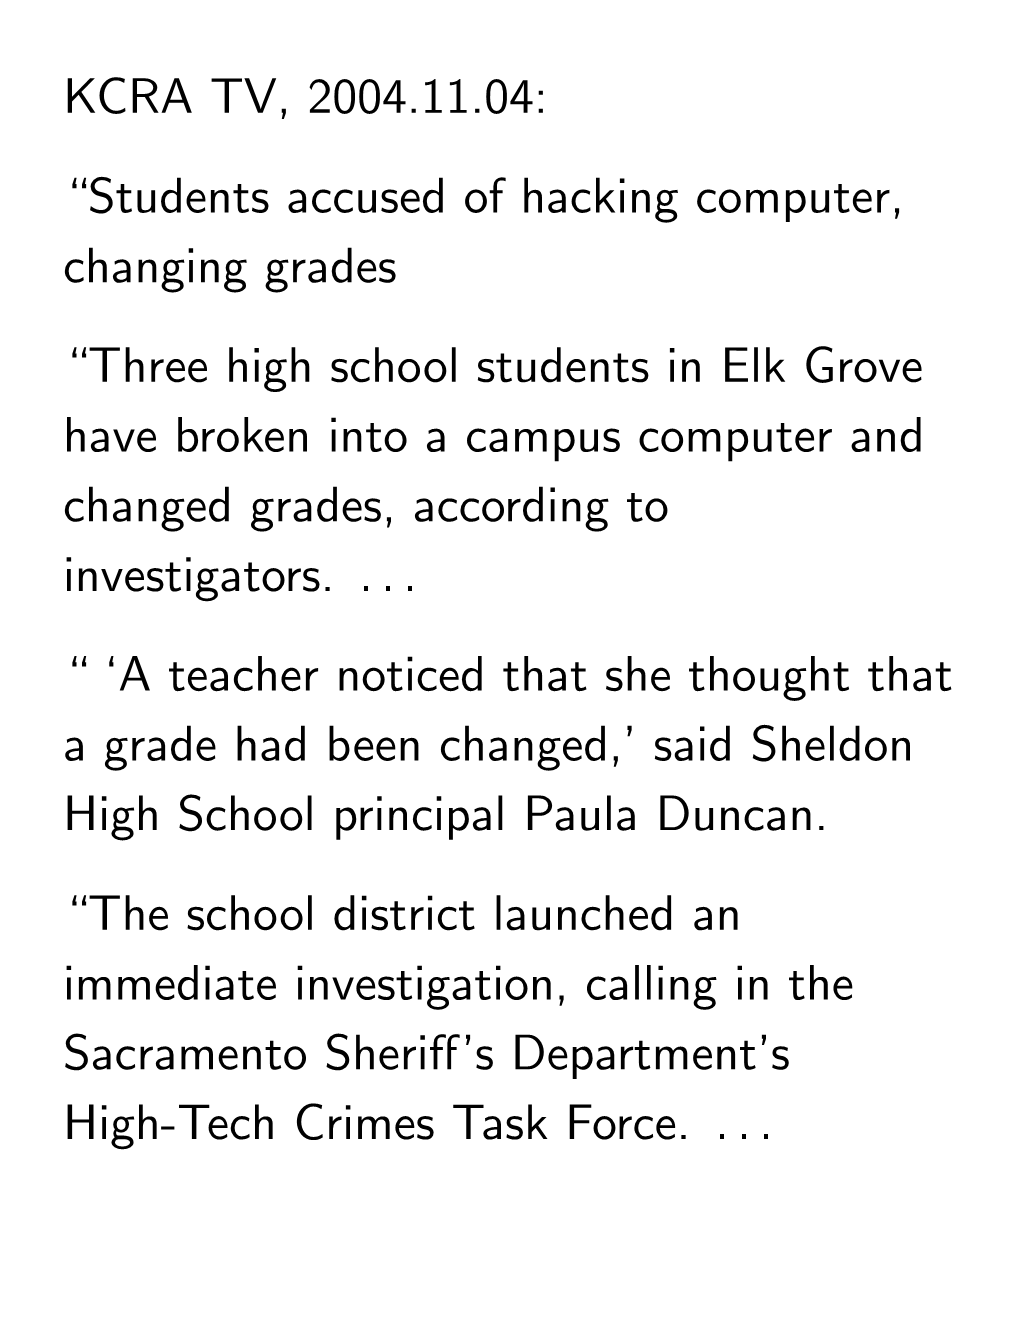 Students Accused of Hacking Computer, Changing Grades “Three High School Students in Elk Grove Have Broken Into a Campus Computer and Changed Grades, According To